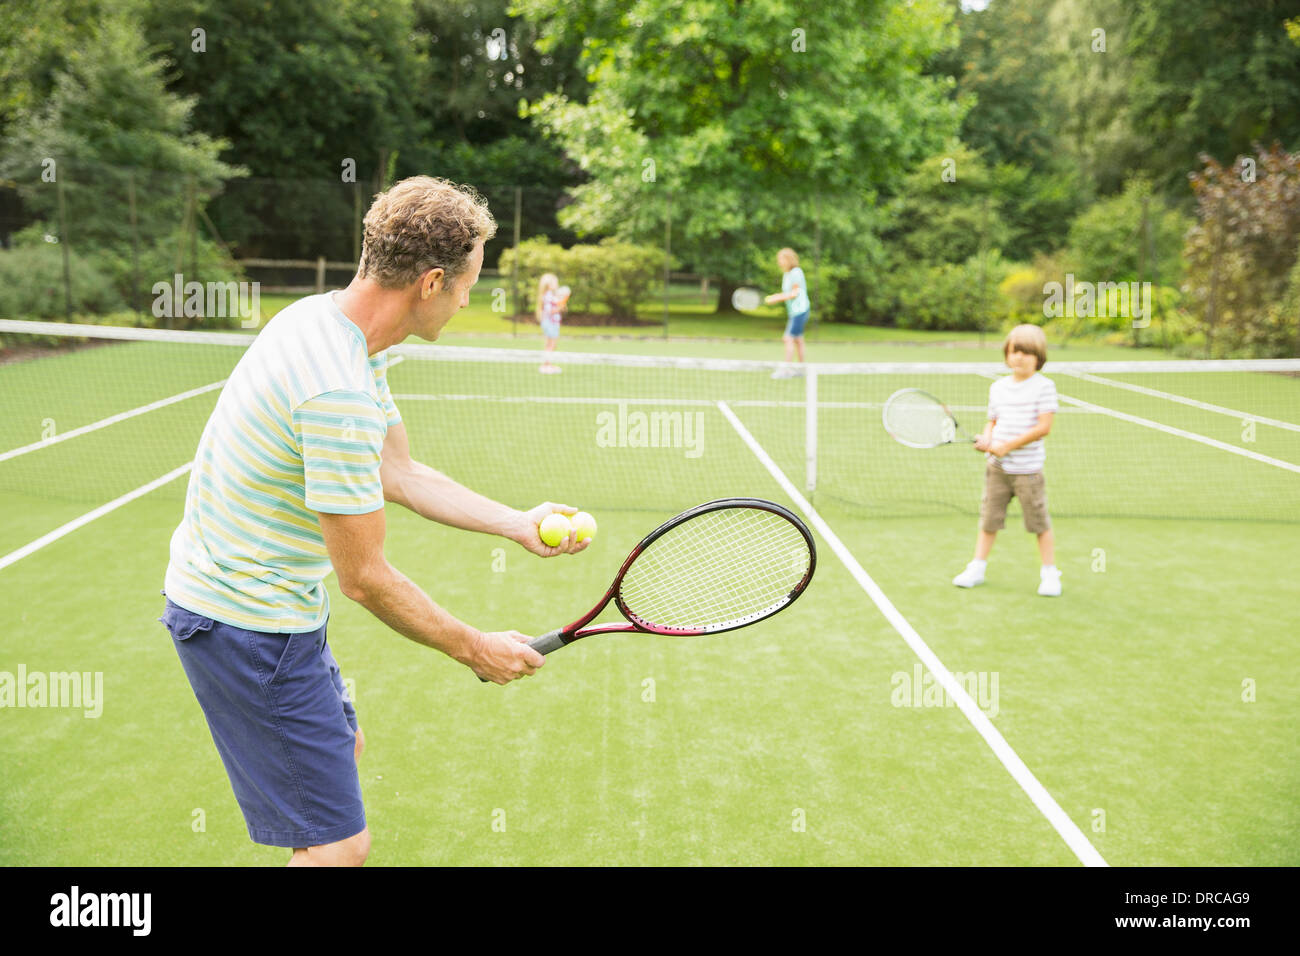 Family playing tennis on grass court Stock Photo